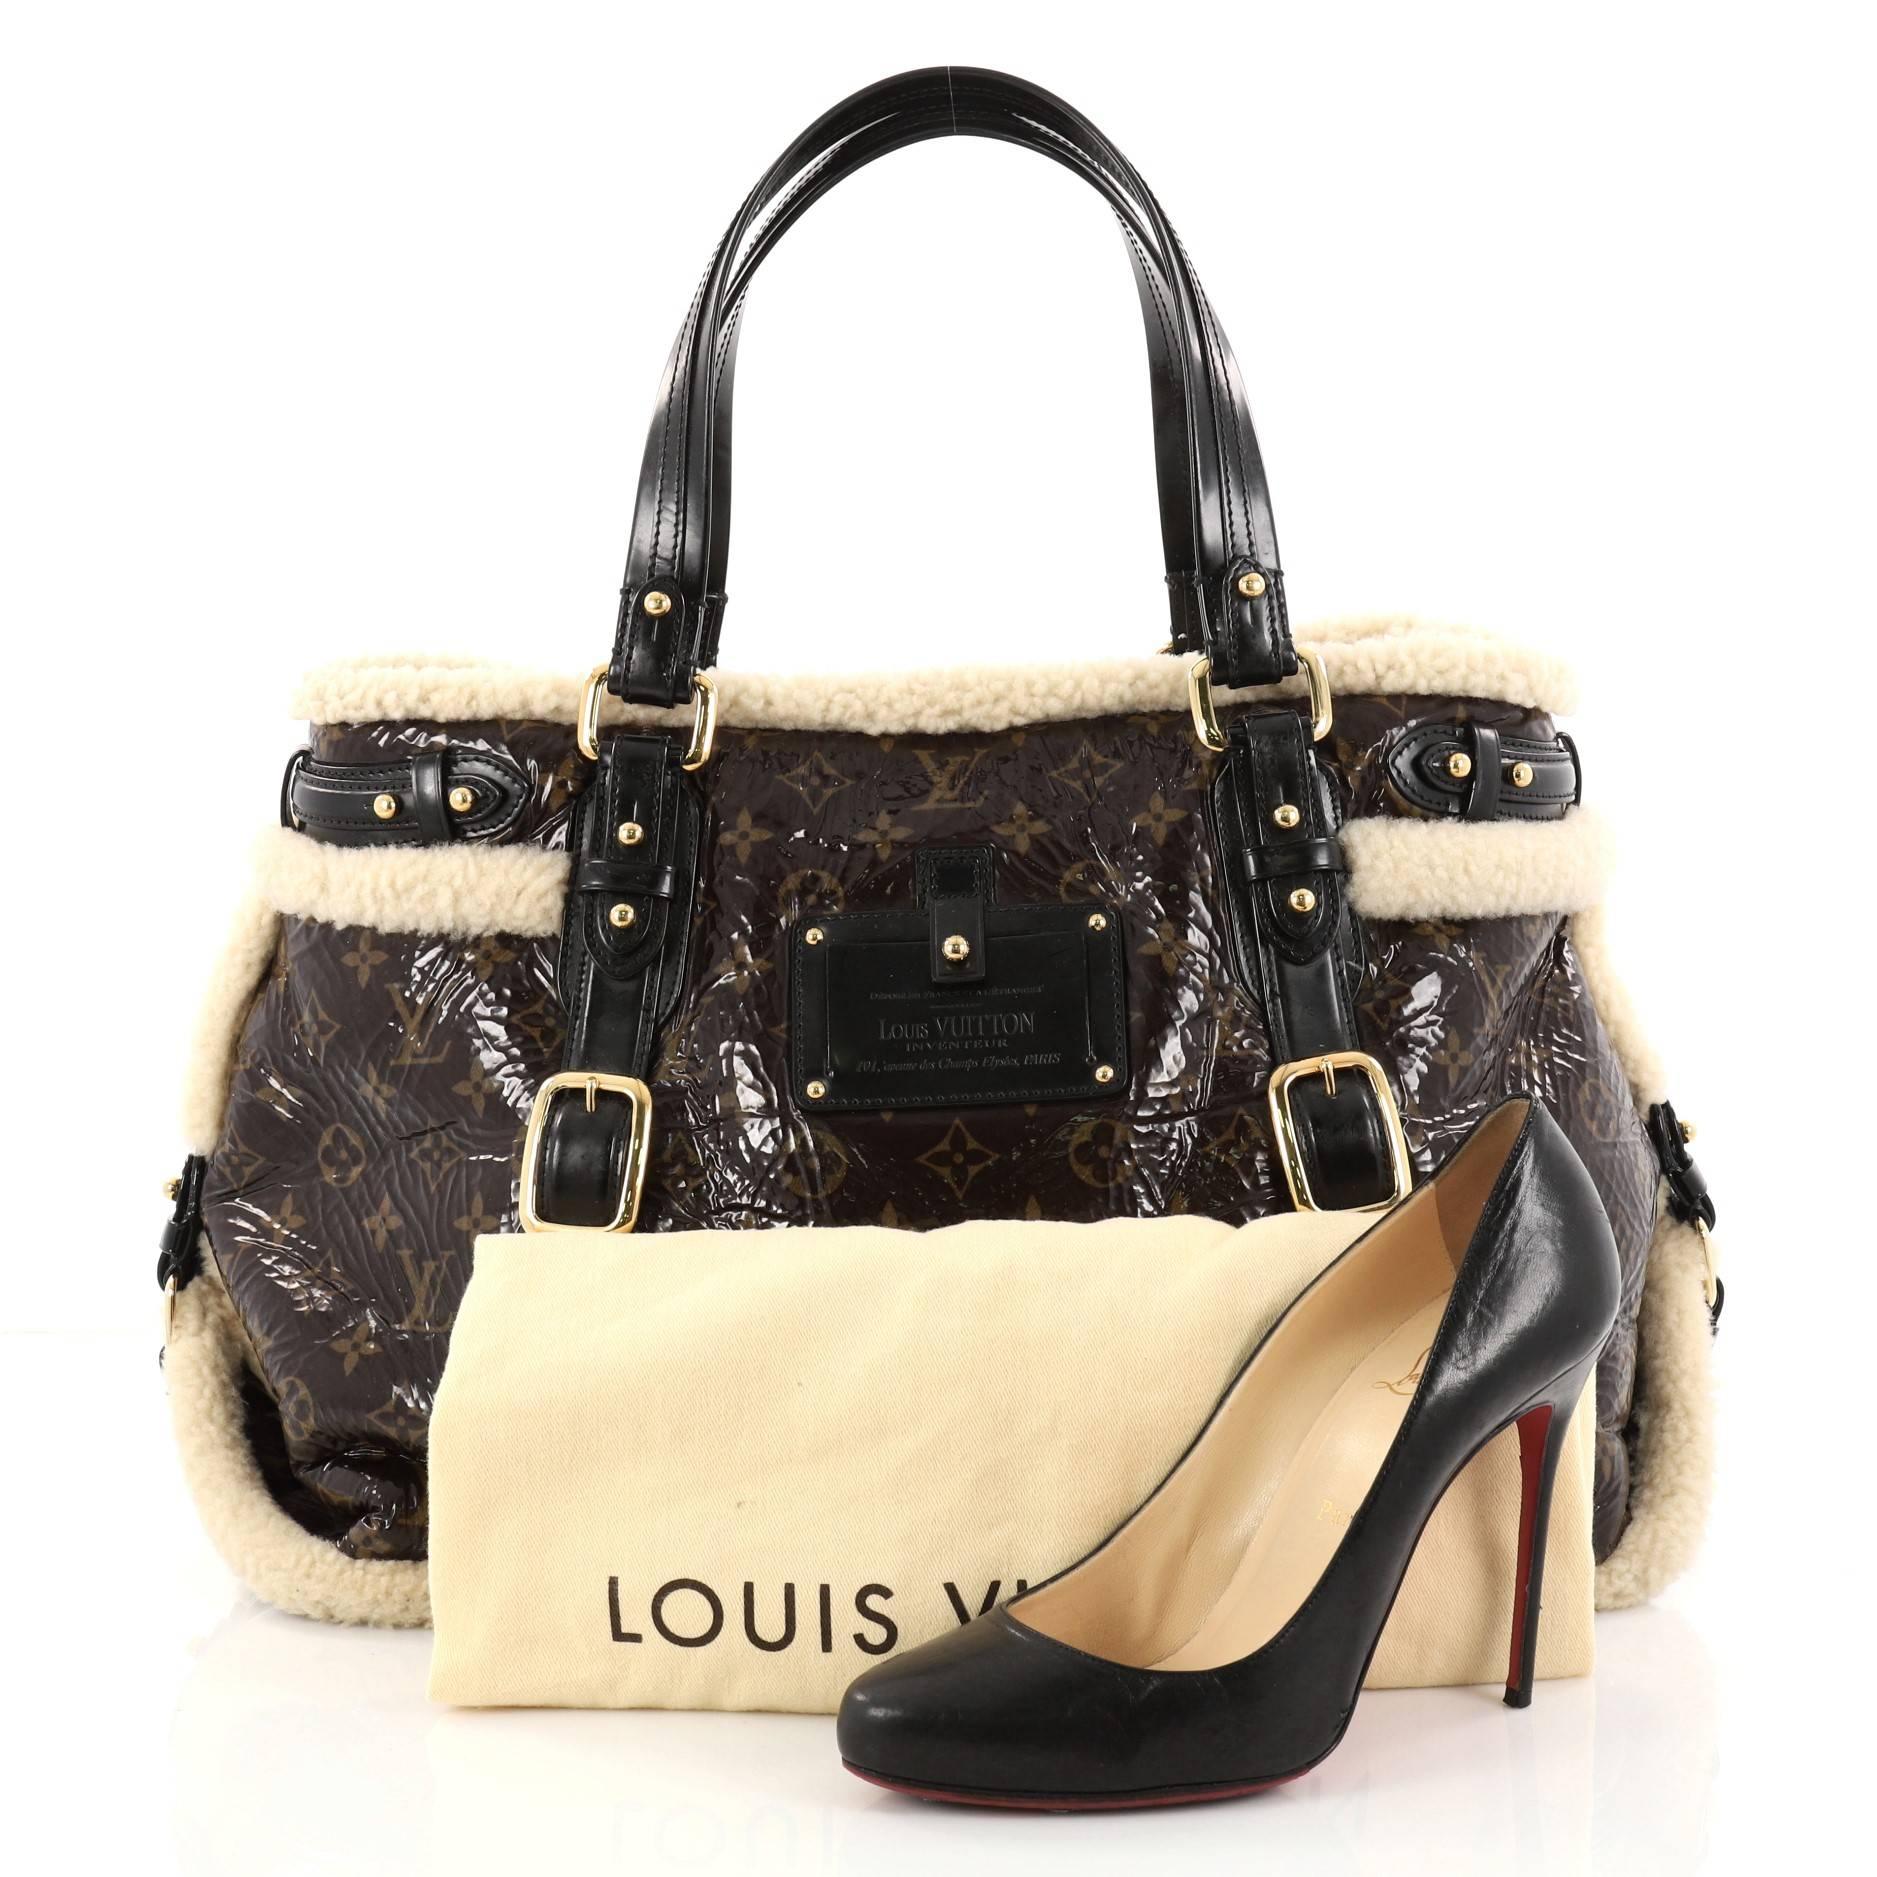 This authentic Louis Vuitton Thunder Handbag Limited Edition Monogram and Shearling is a rare limited edition runway piece. Crafted in brown monogram patent leather with off-white shearling trims, this bag features dual-flat leather handles, Louis